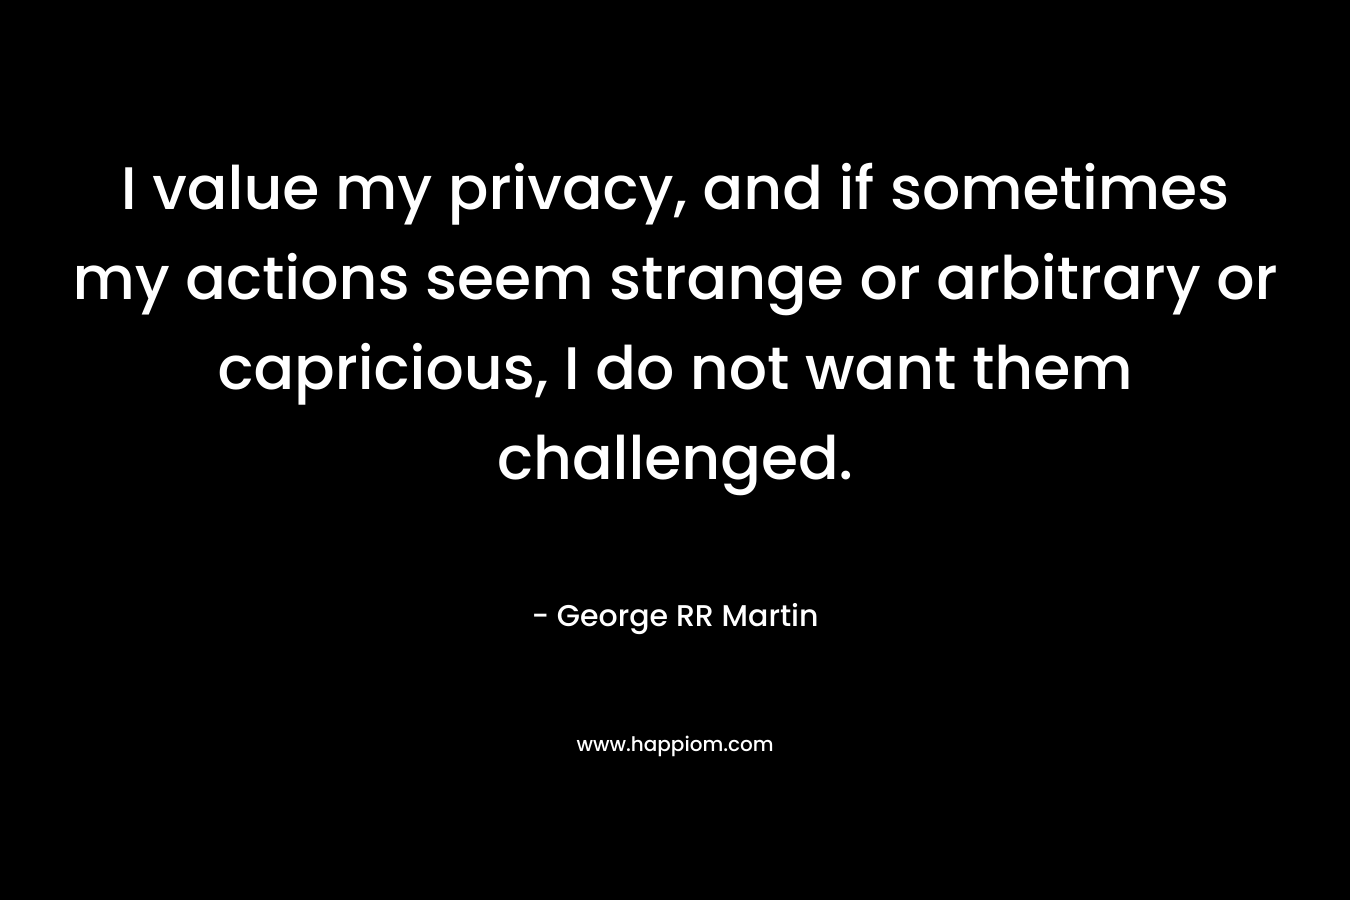 I value my privacy, and if sometimes my actions seem strange or arbitrary or capricious, I do not want them challenged. – George RR Martin